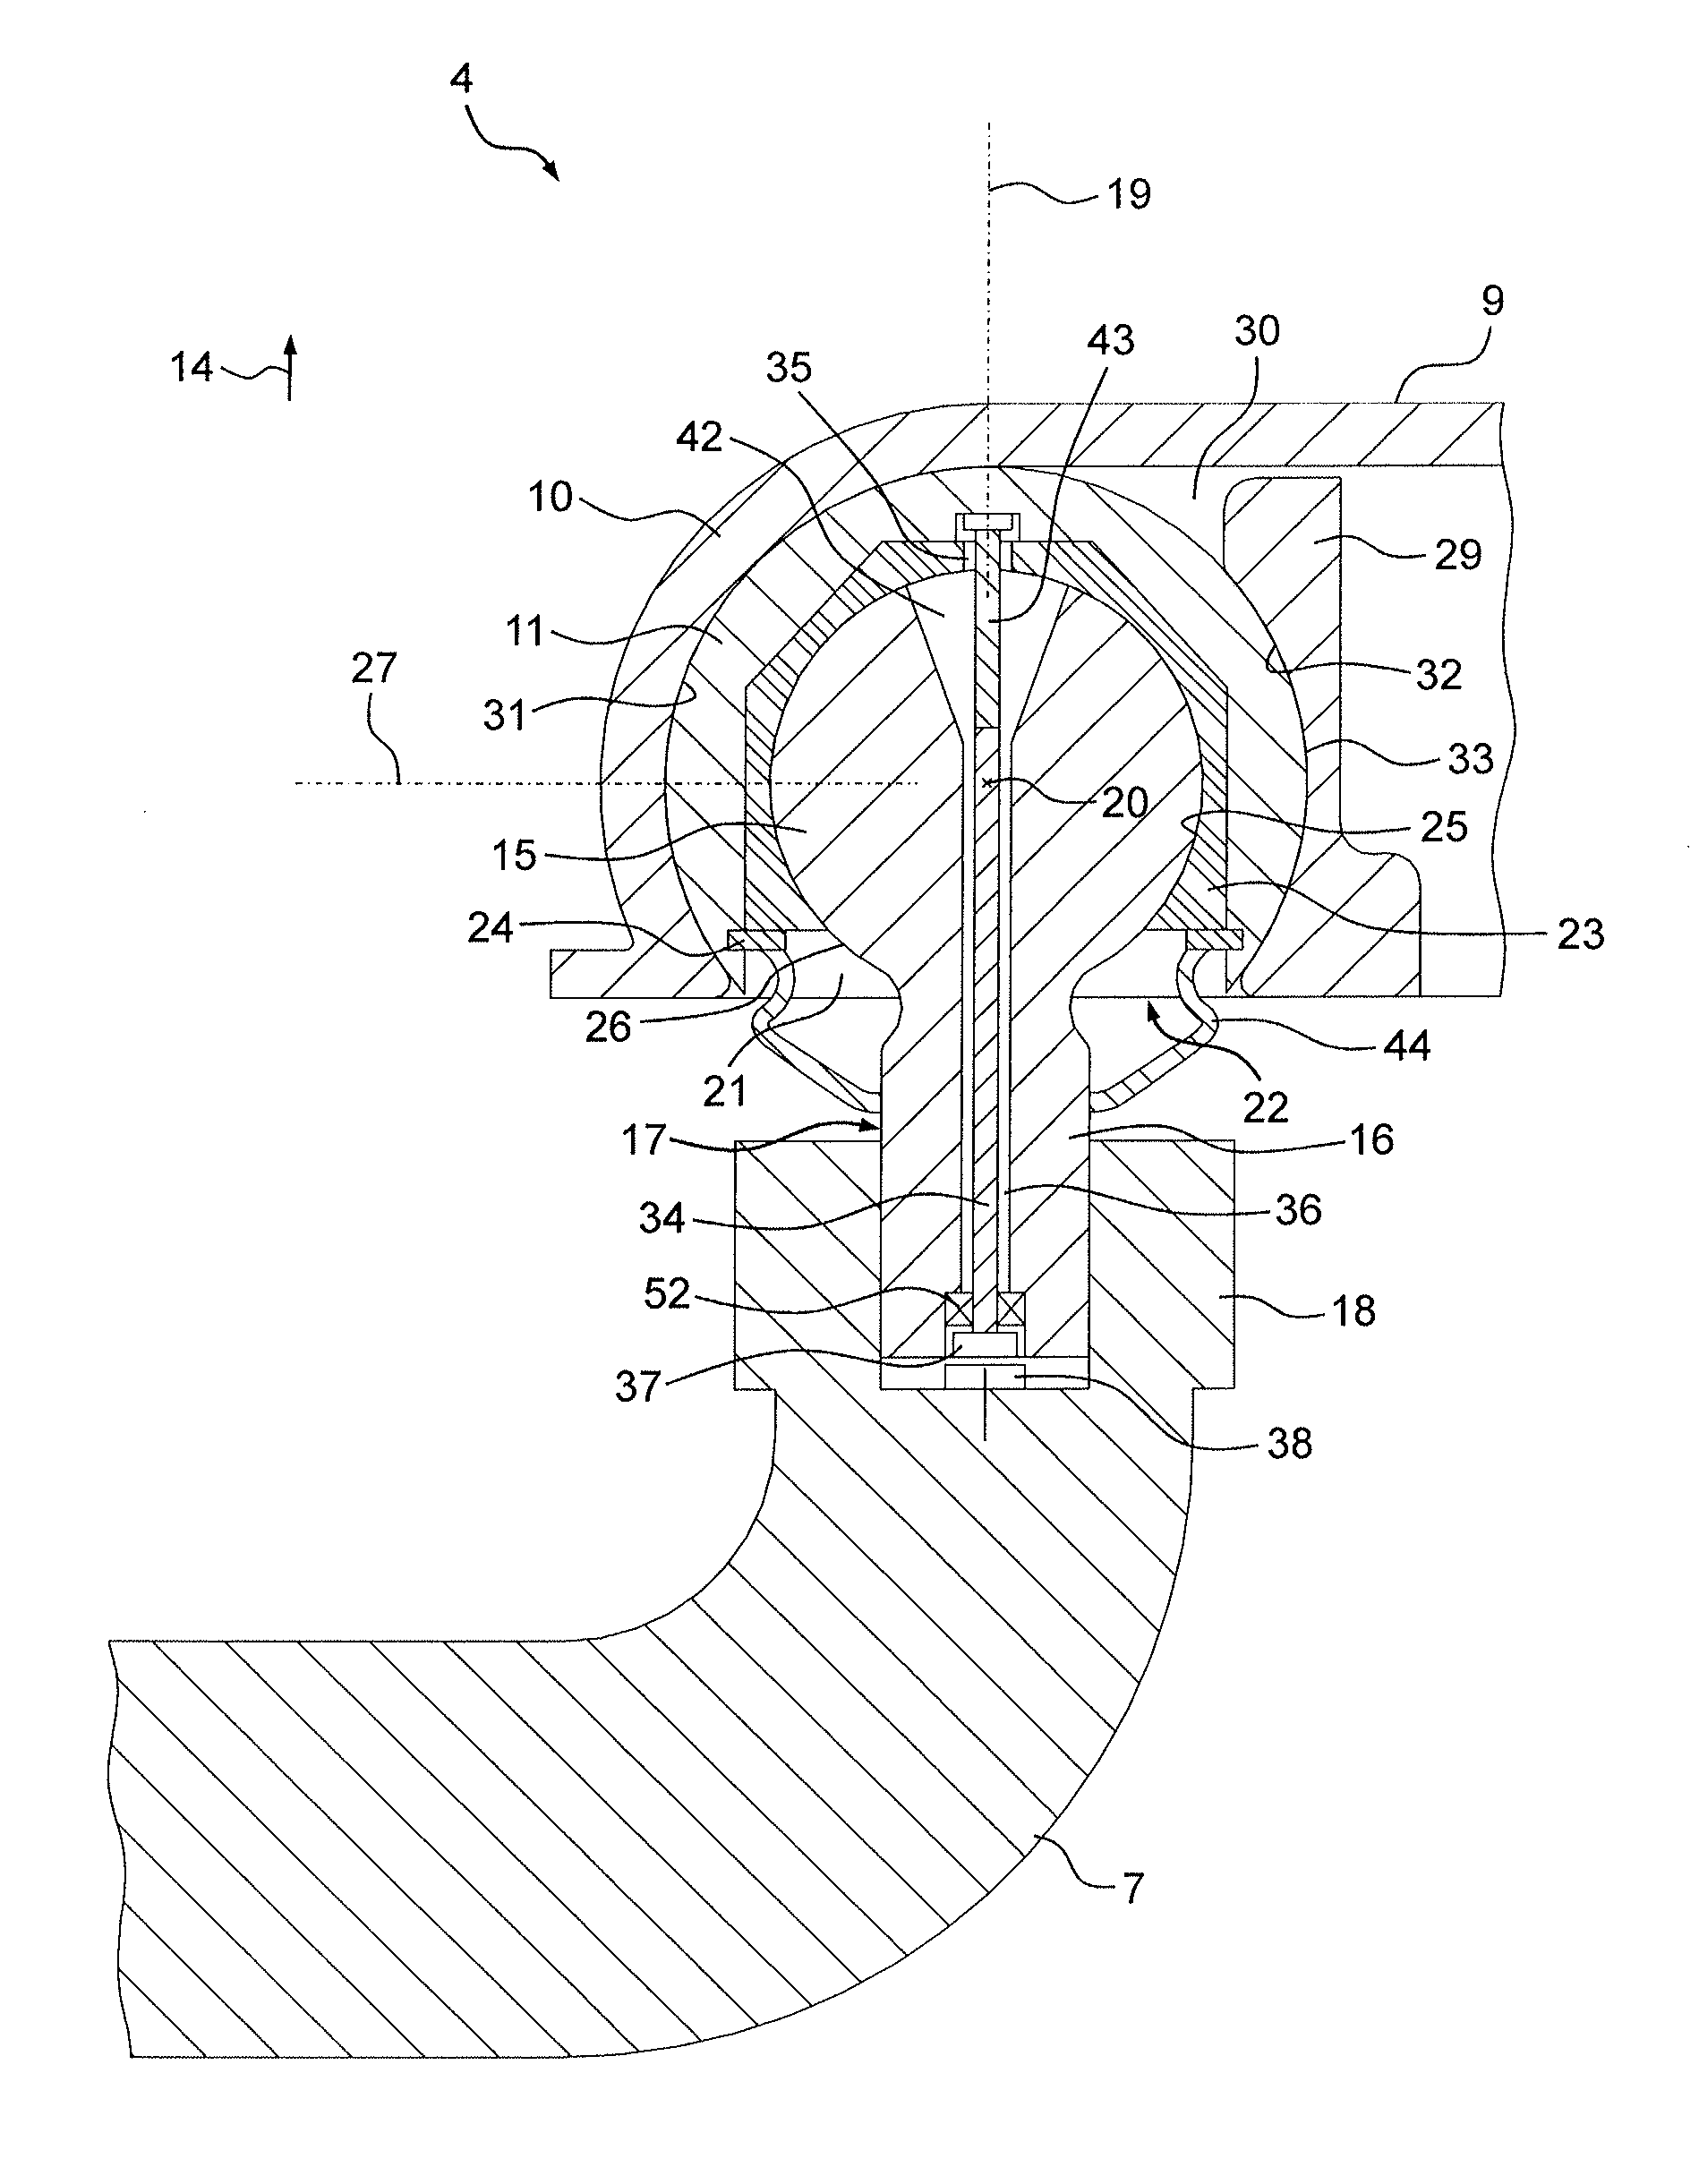 Trailer towing device for a tractor vehicle